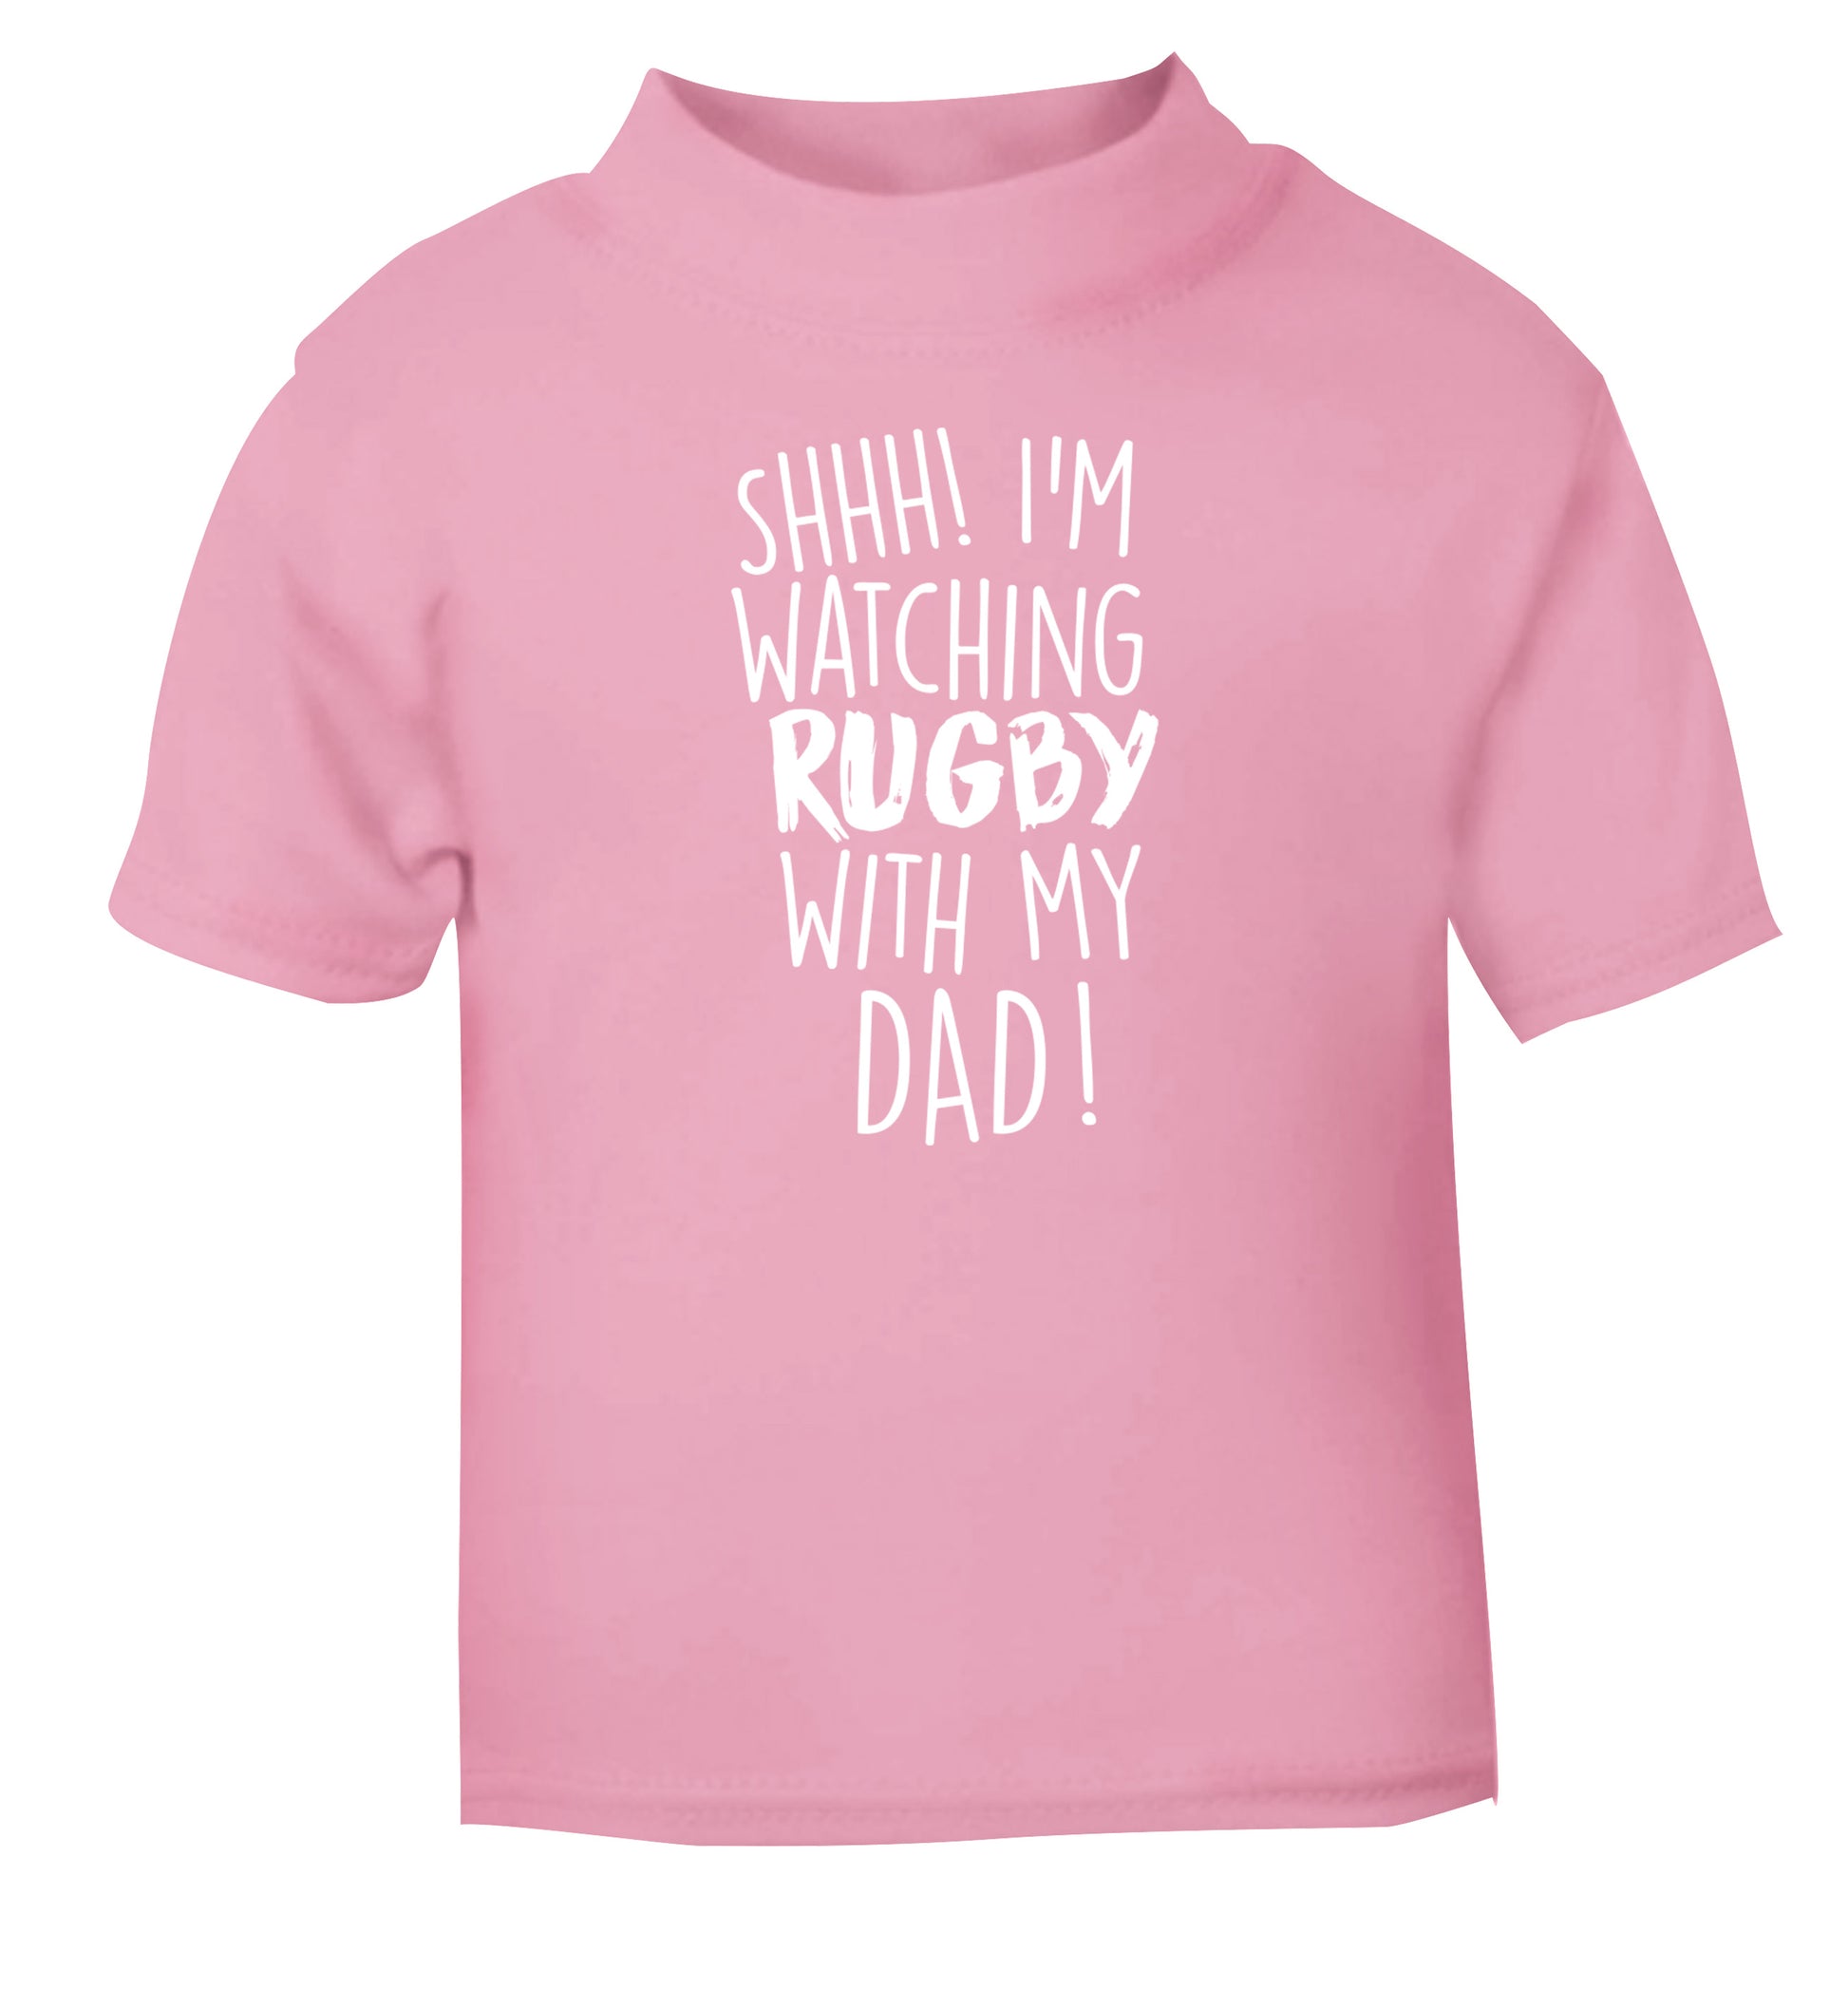 Shh... I'm watching rugby with my dad light pink Baby Toddler Tshirt 2 Years